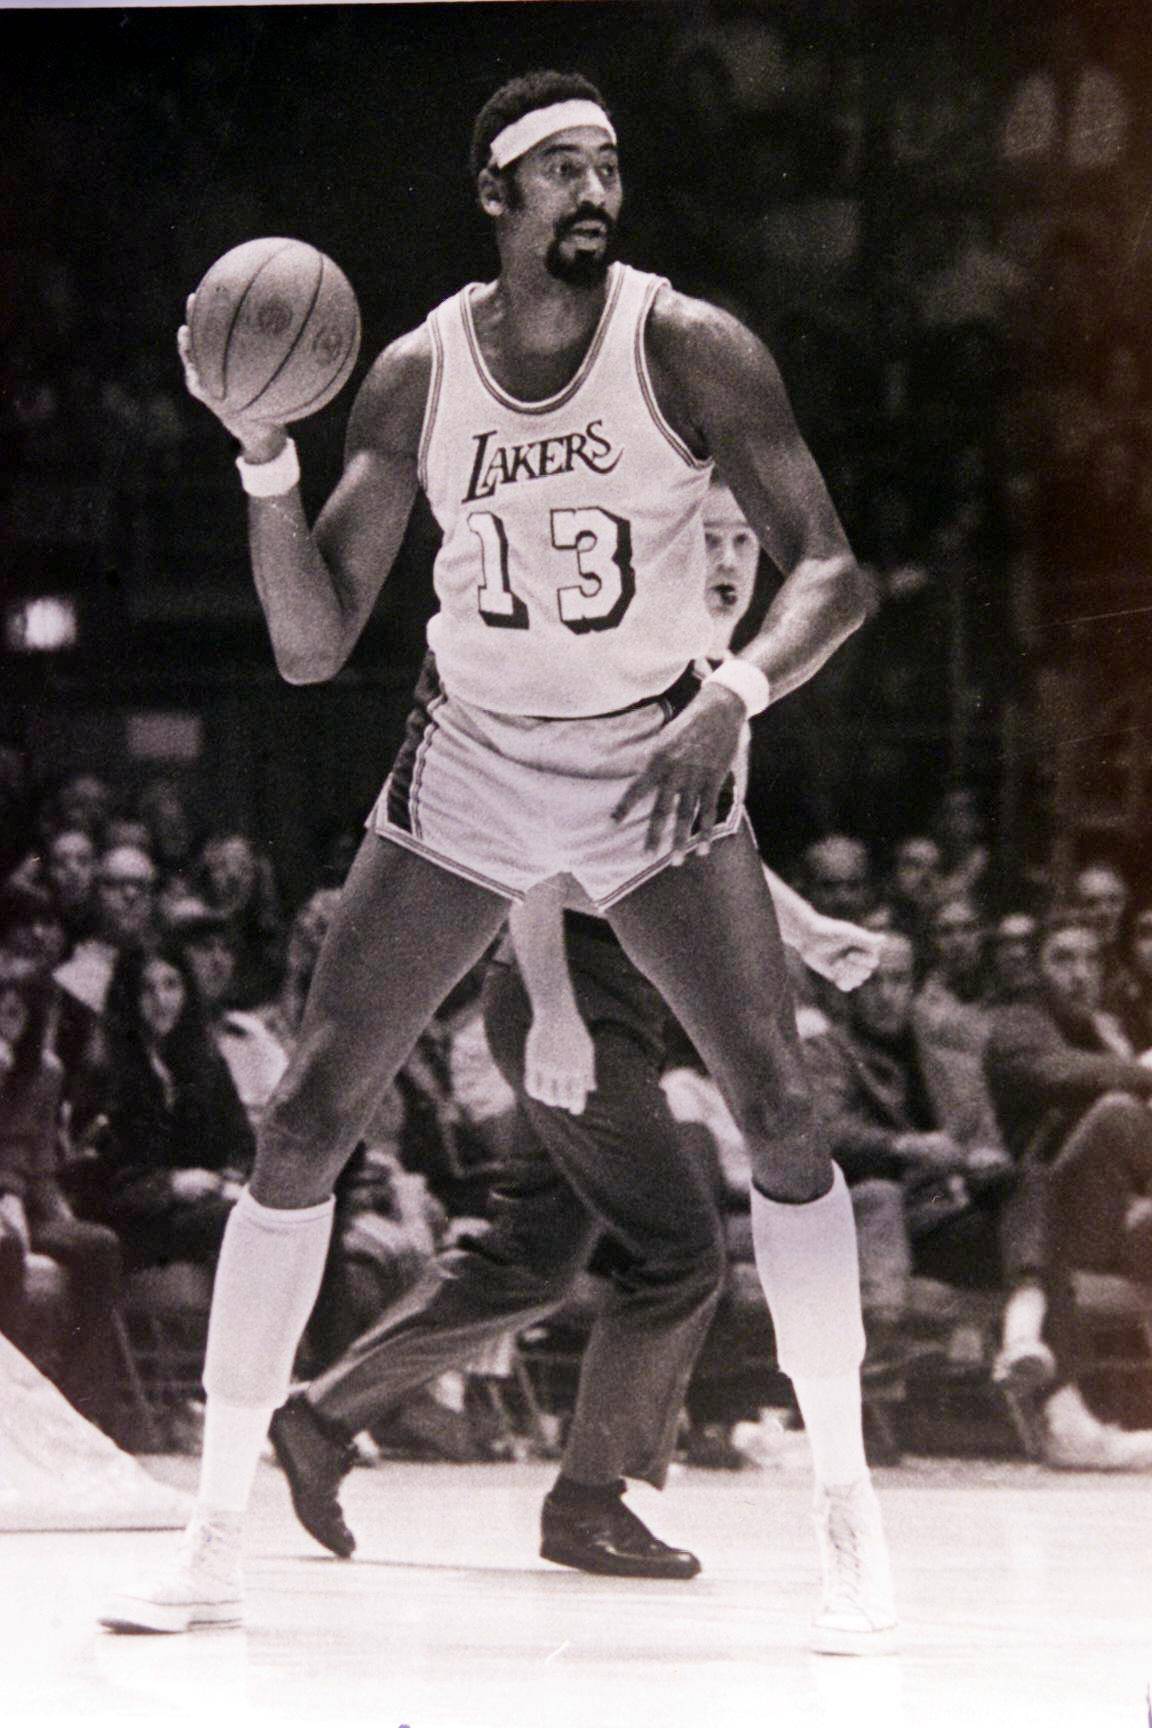 Wilt Chamberlain - NBA legend Wilt “The Stilt” Chamberlain is credited as one of the originators of the sporty look in the 1960s and '70s.&nbsp; (Photo: Kevin C. Cox/Getty Images)